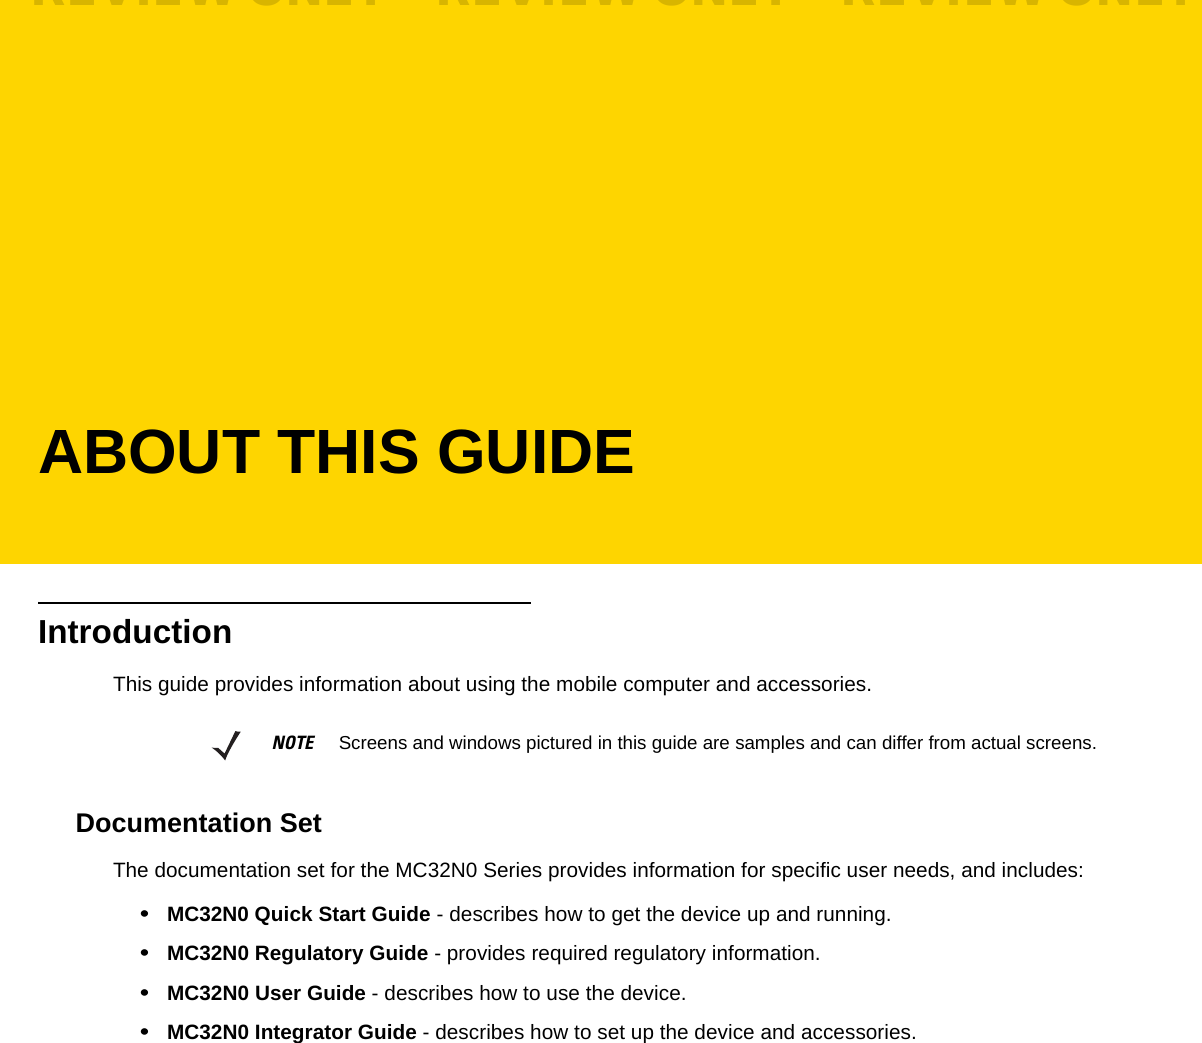 ABOUT THIS GUIDEIntroductionThis guide provides information about using the mobile computer and accessories.Documentation SetThe documentation set for the MC32N0 Series provides information for specific user needs, and includes:•MC32N0 Quick Start Guide - describes how to get the device up and running.•MC32N0 Regulatory Guide - provides required regulatory information.•MC32N0 User Guide - describes how to use the device.•MC32N0 Integrator Guide - describes how to set up the device and accessories.NOTE     Screens and windows pictured in this guide are samples and can differ from actual screens.REVIEW ONLY - REVIEW ONLY - REVIEW ONLY                             REVIEW ONLY - REVIEW ONLY - REVIEW ONLY